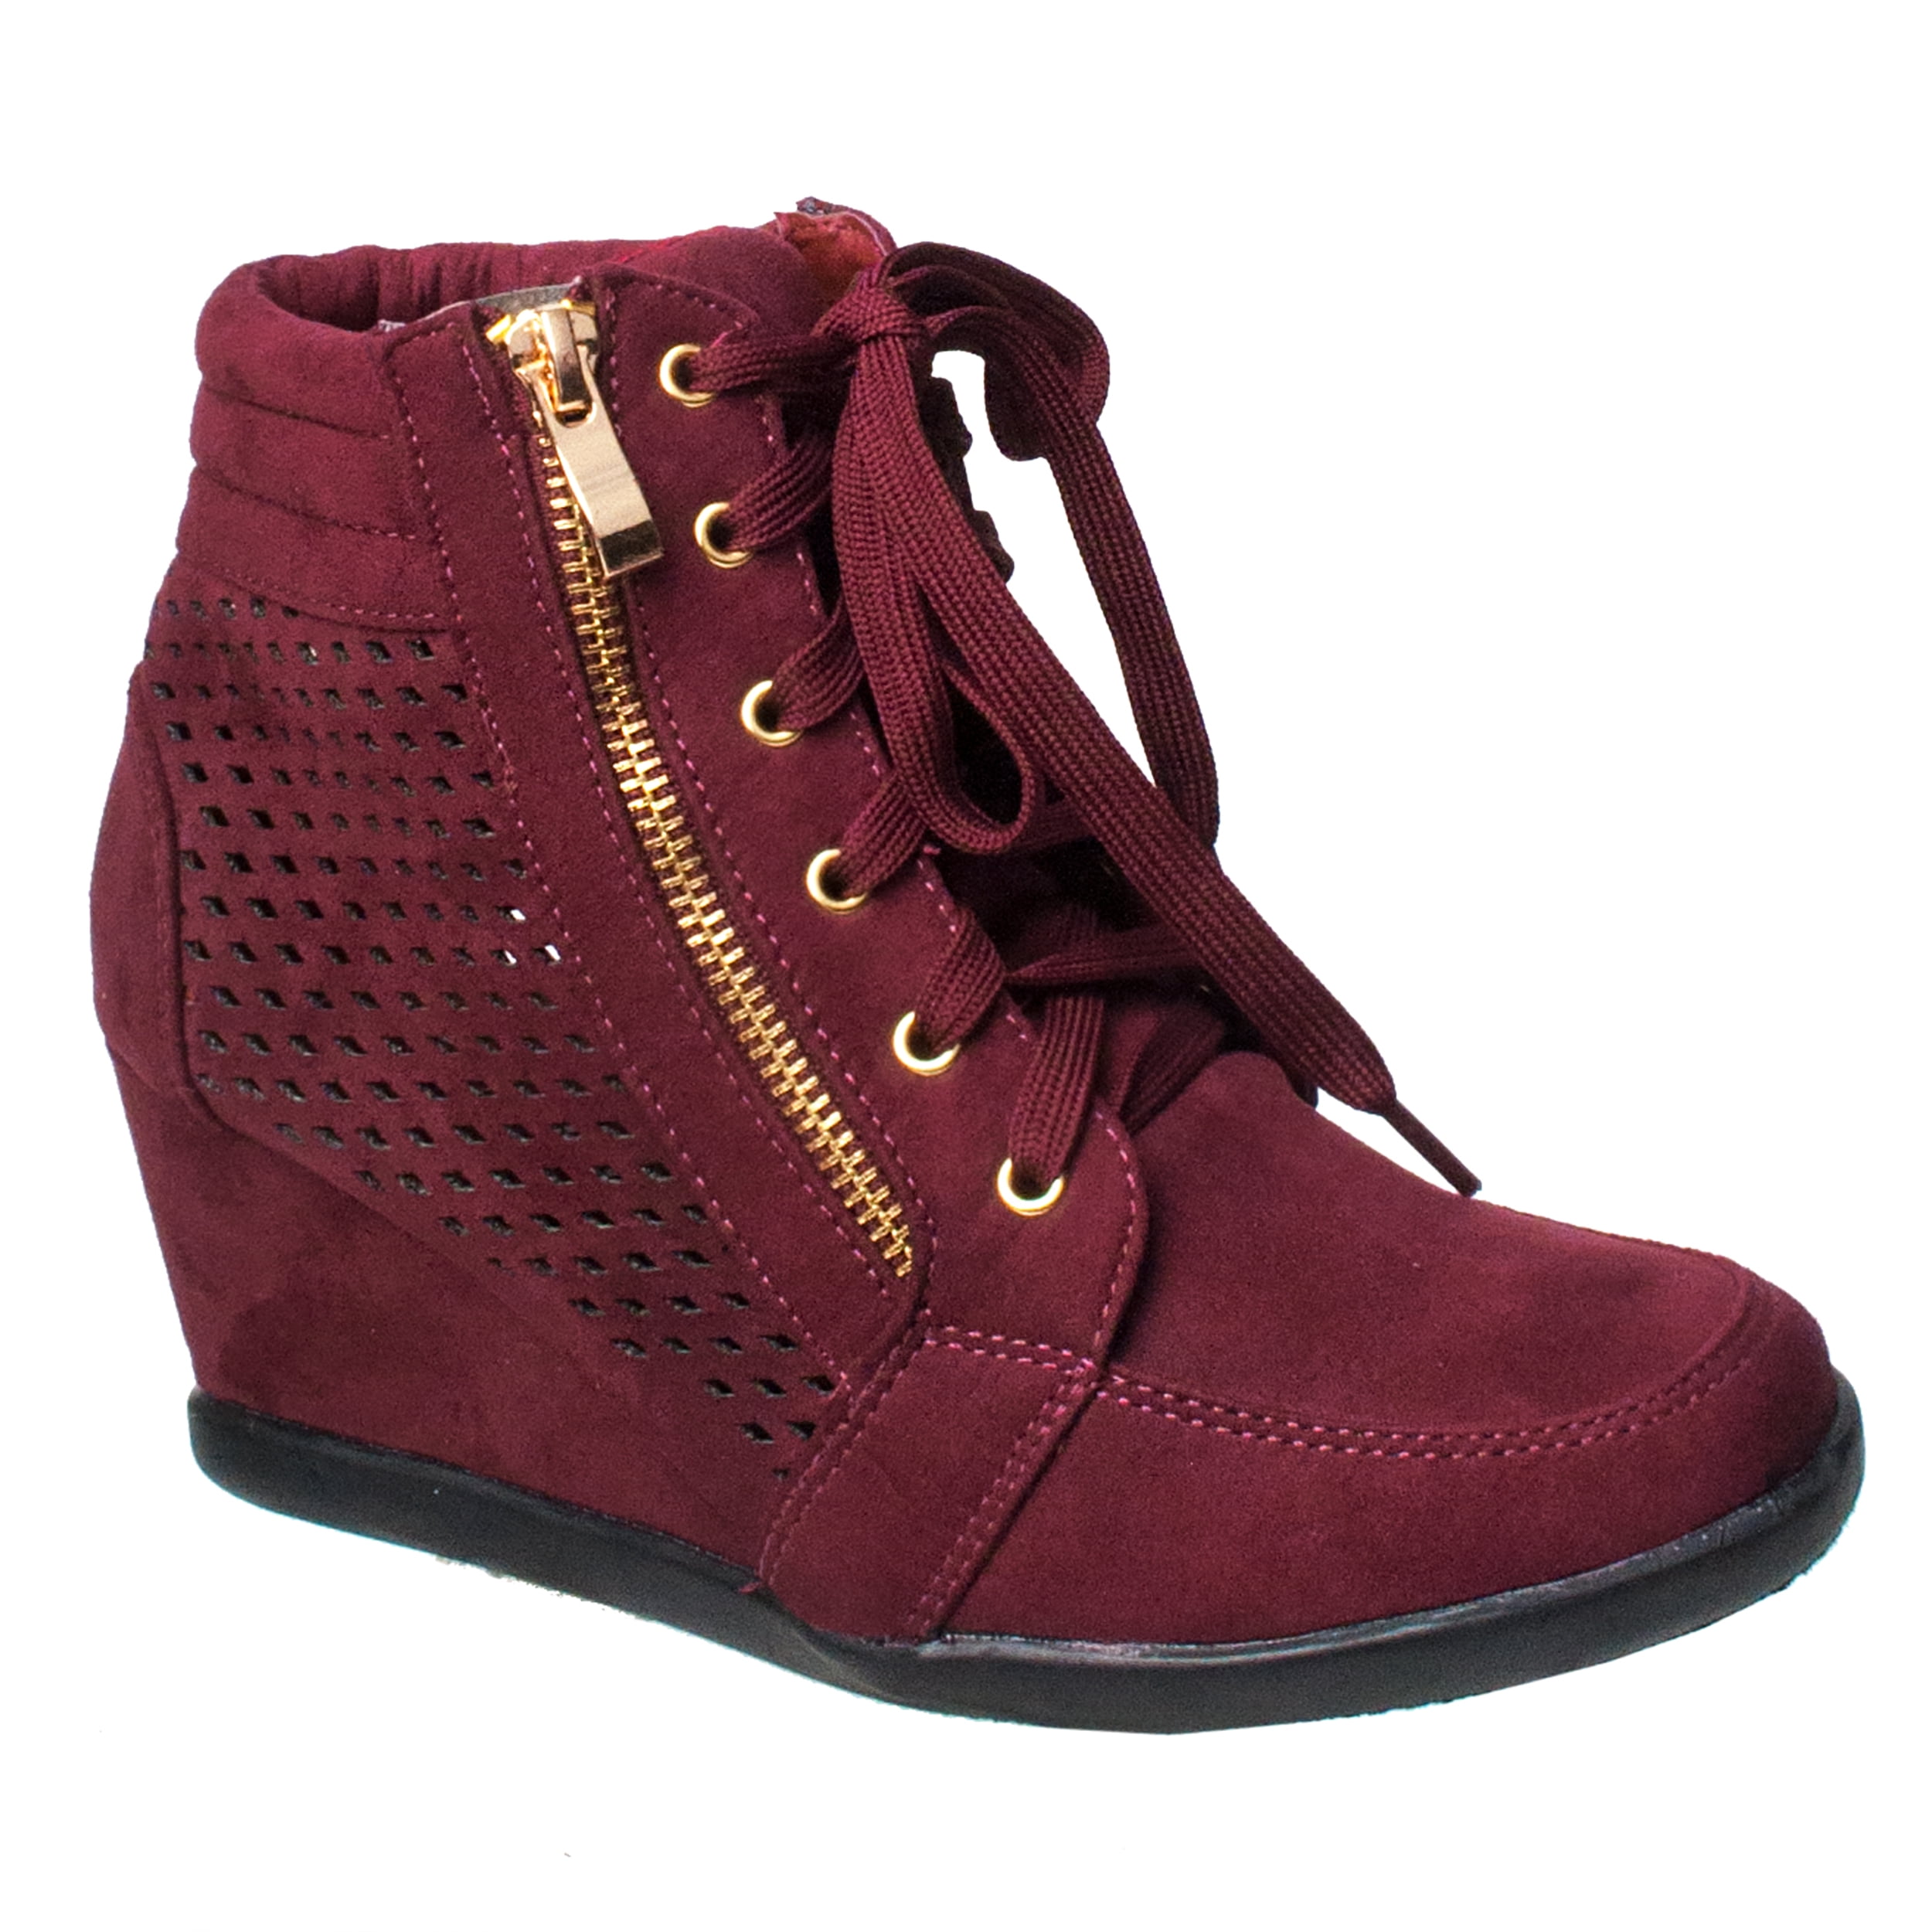 WOMENS RED LACE-UP FLAT TRAINER HI-TOP PUMPS CASUAL ANKLE BOOTS SHOES UK 3-8 